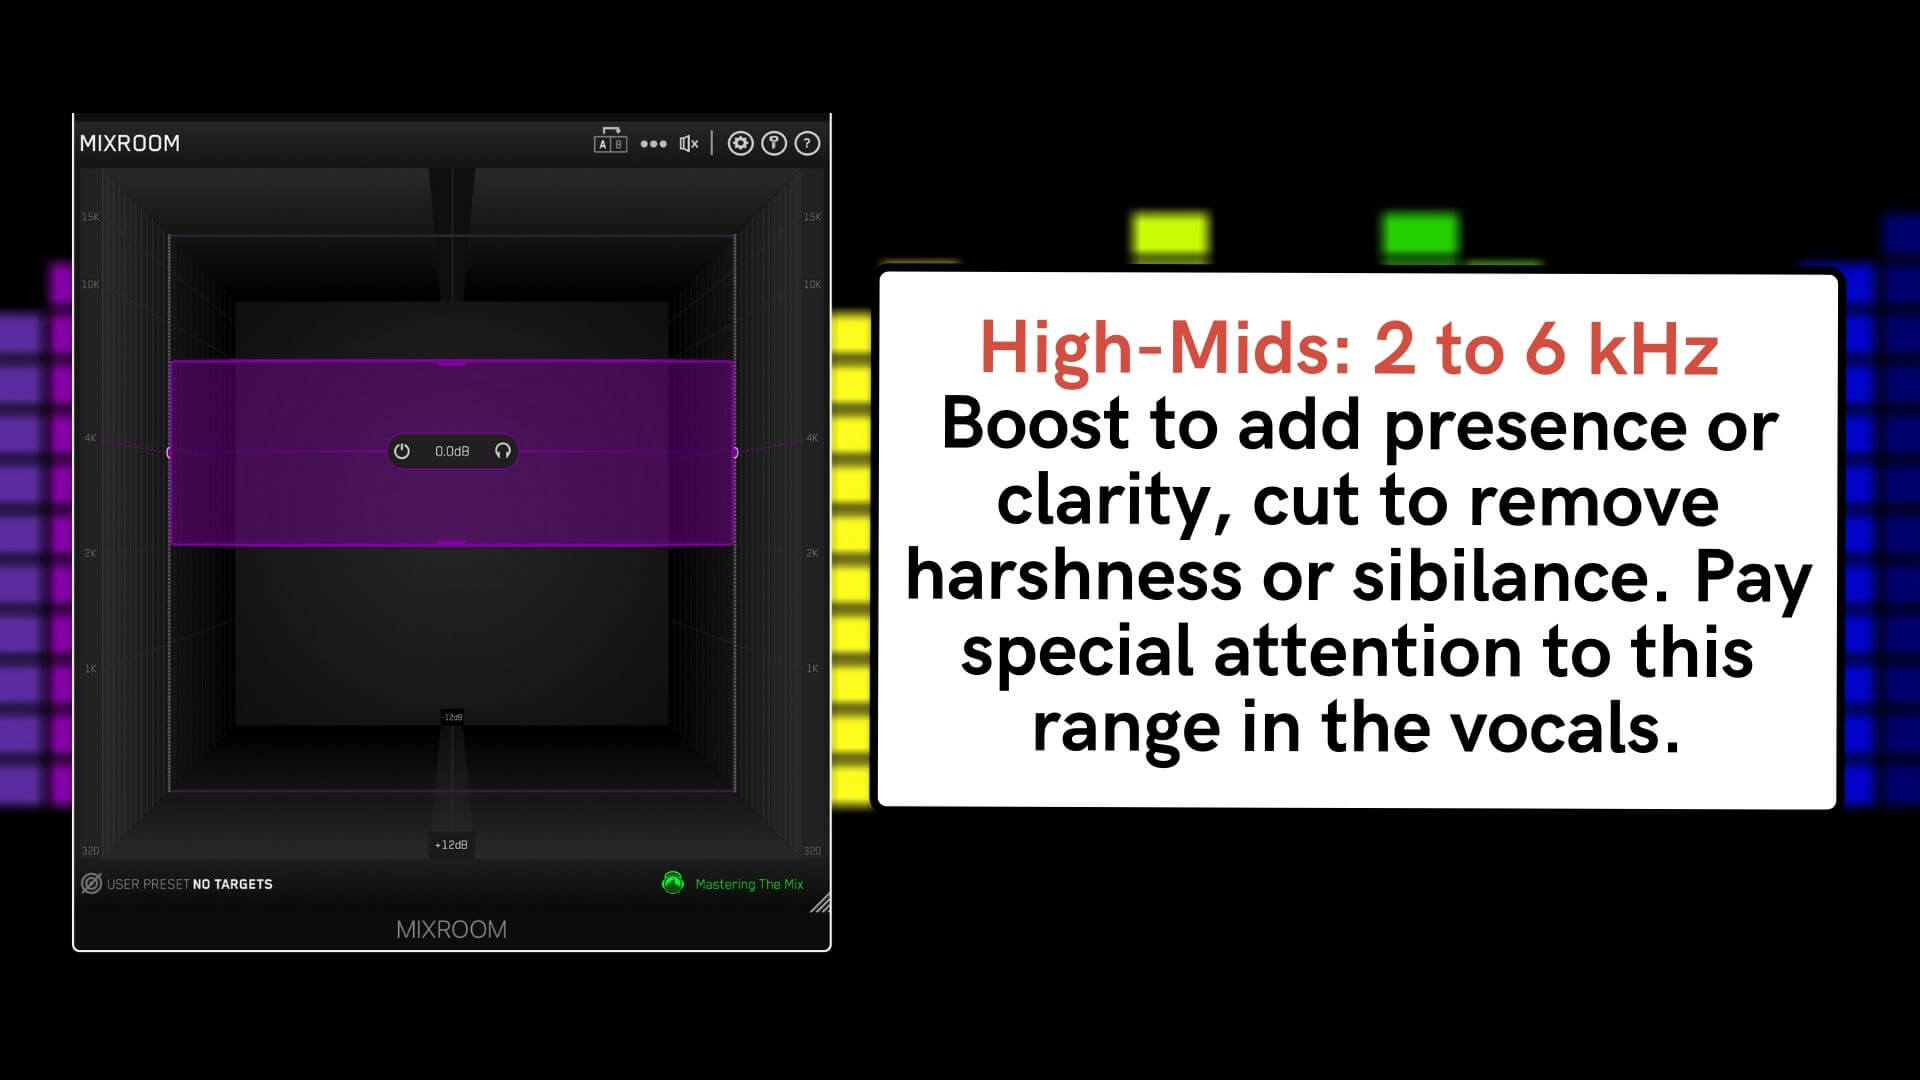 High-Mids: 2 to 6 kHz